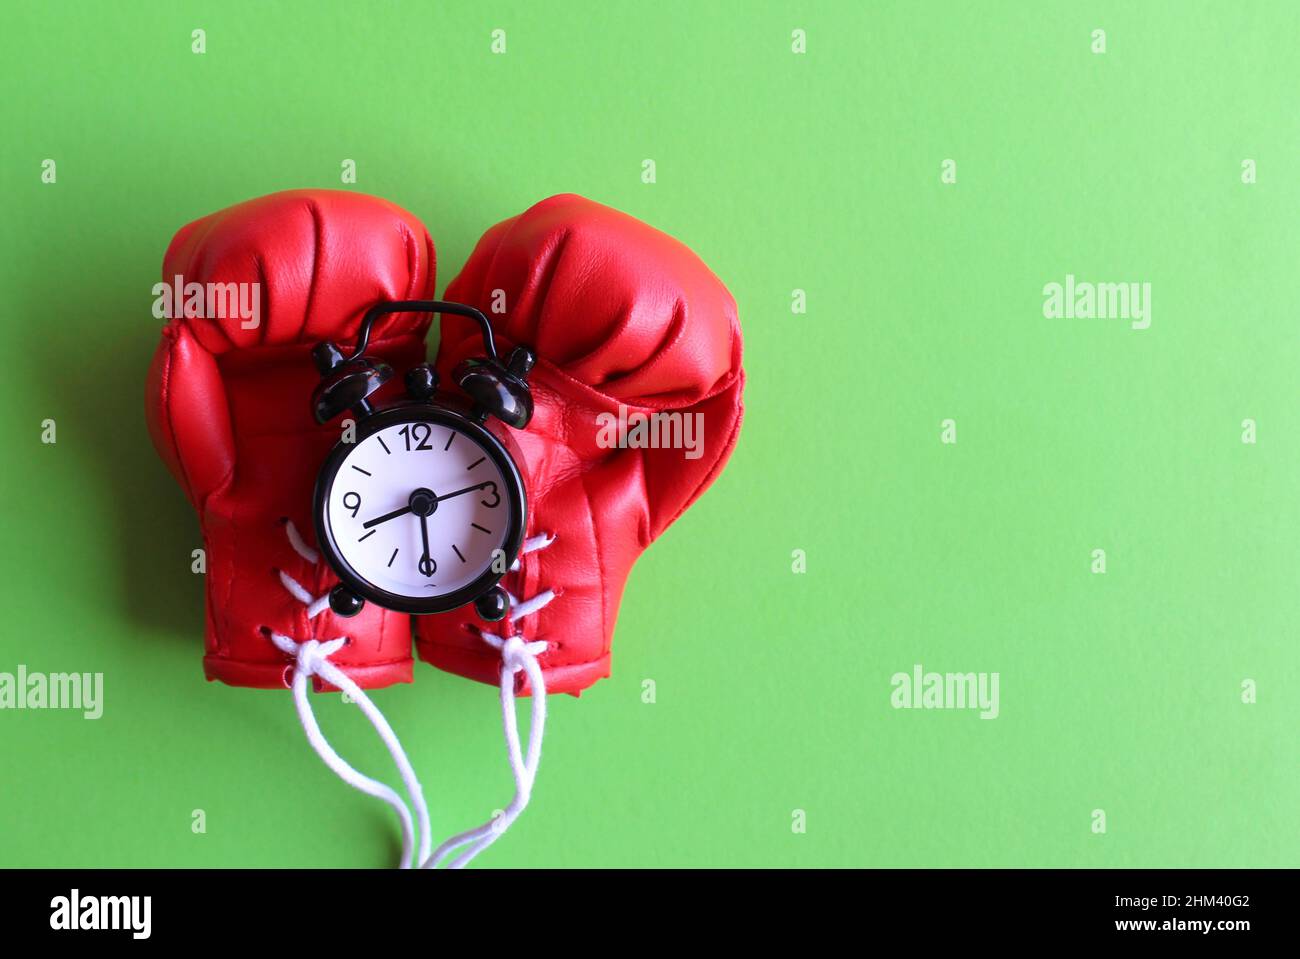 Training and exercise time. Top view image of boxing gloves and alarm clock on green background. Stock Photo